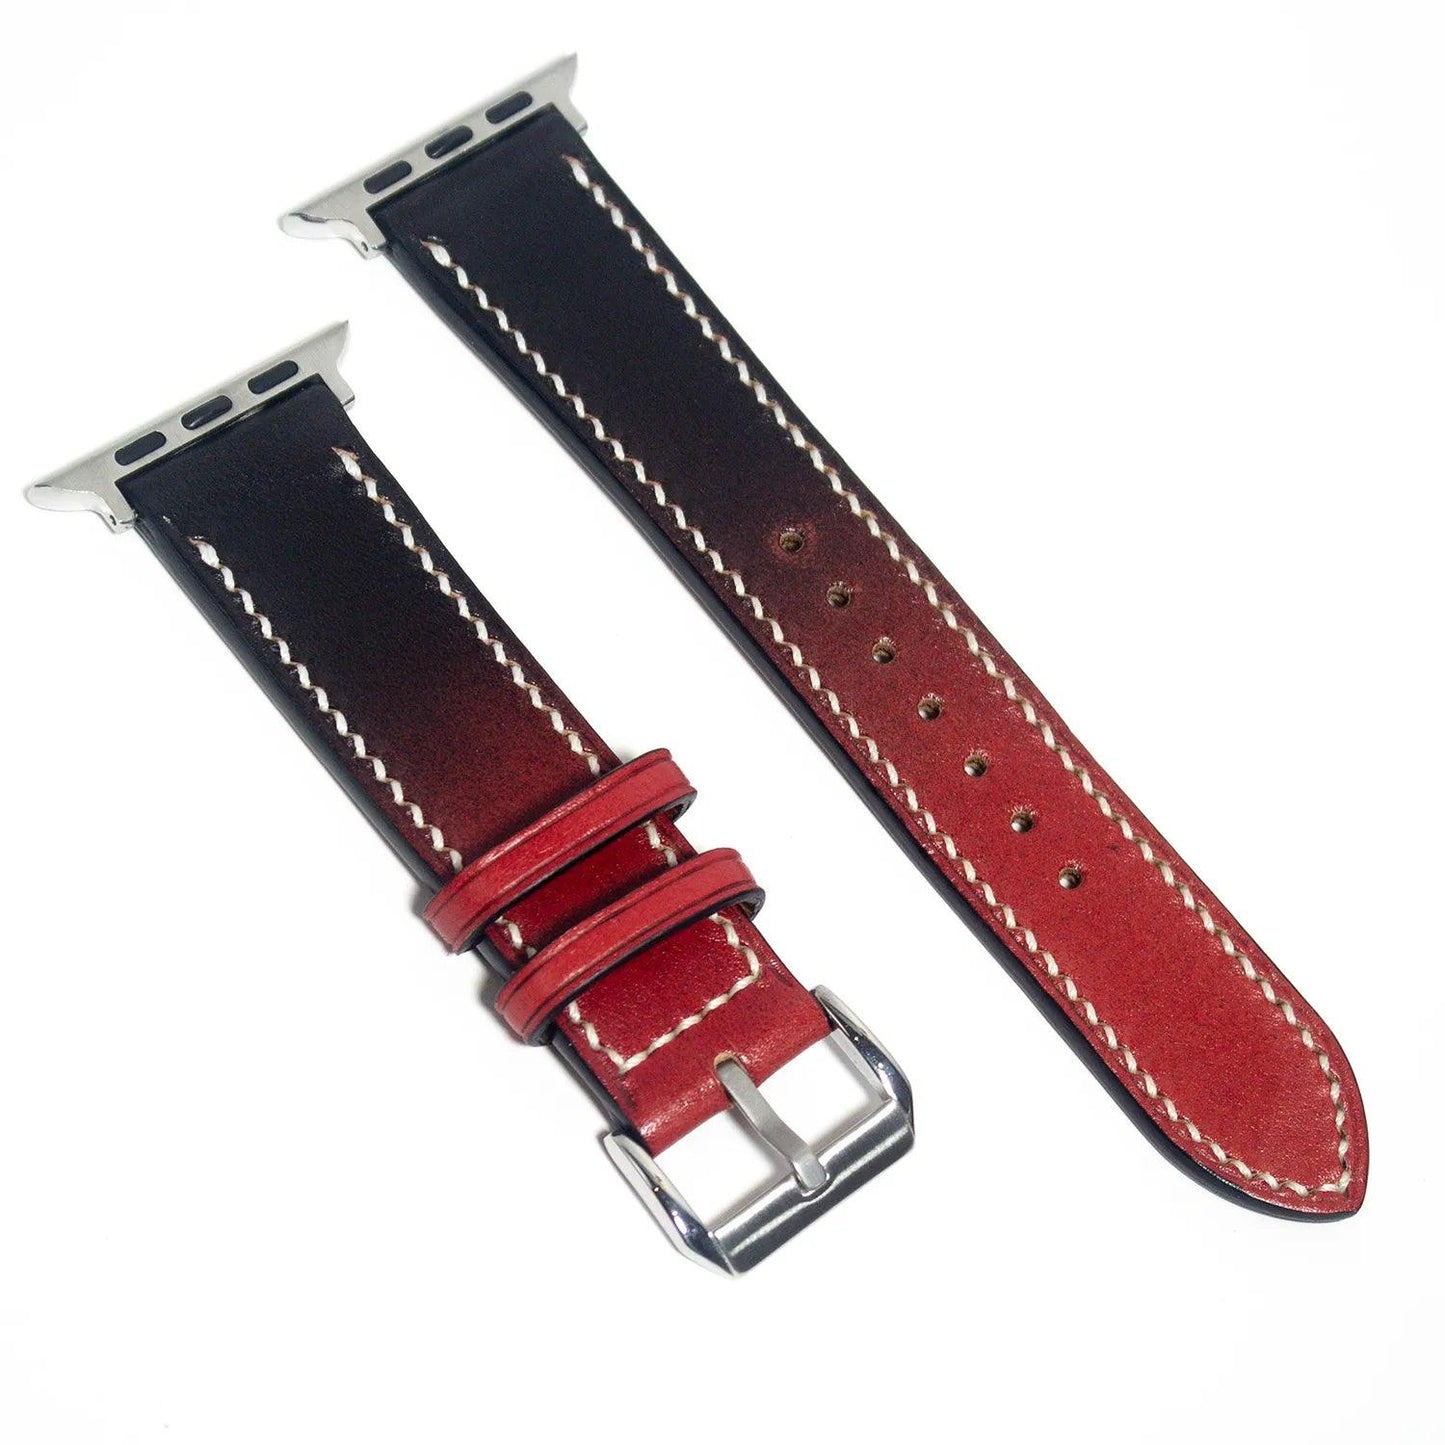 Innovative leather Apple Watch band that blends red into black using Veg leather, ideal for those who appreciate a smooth transition.